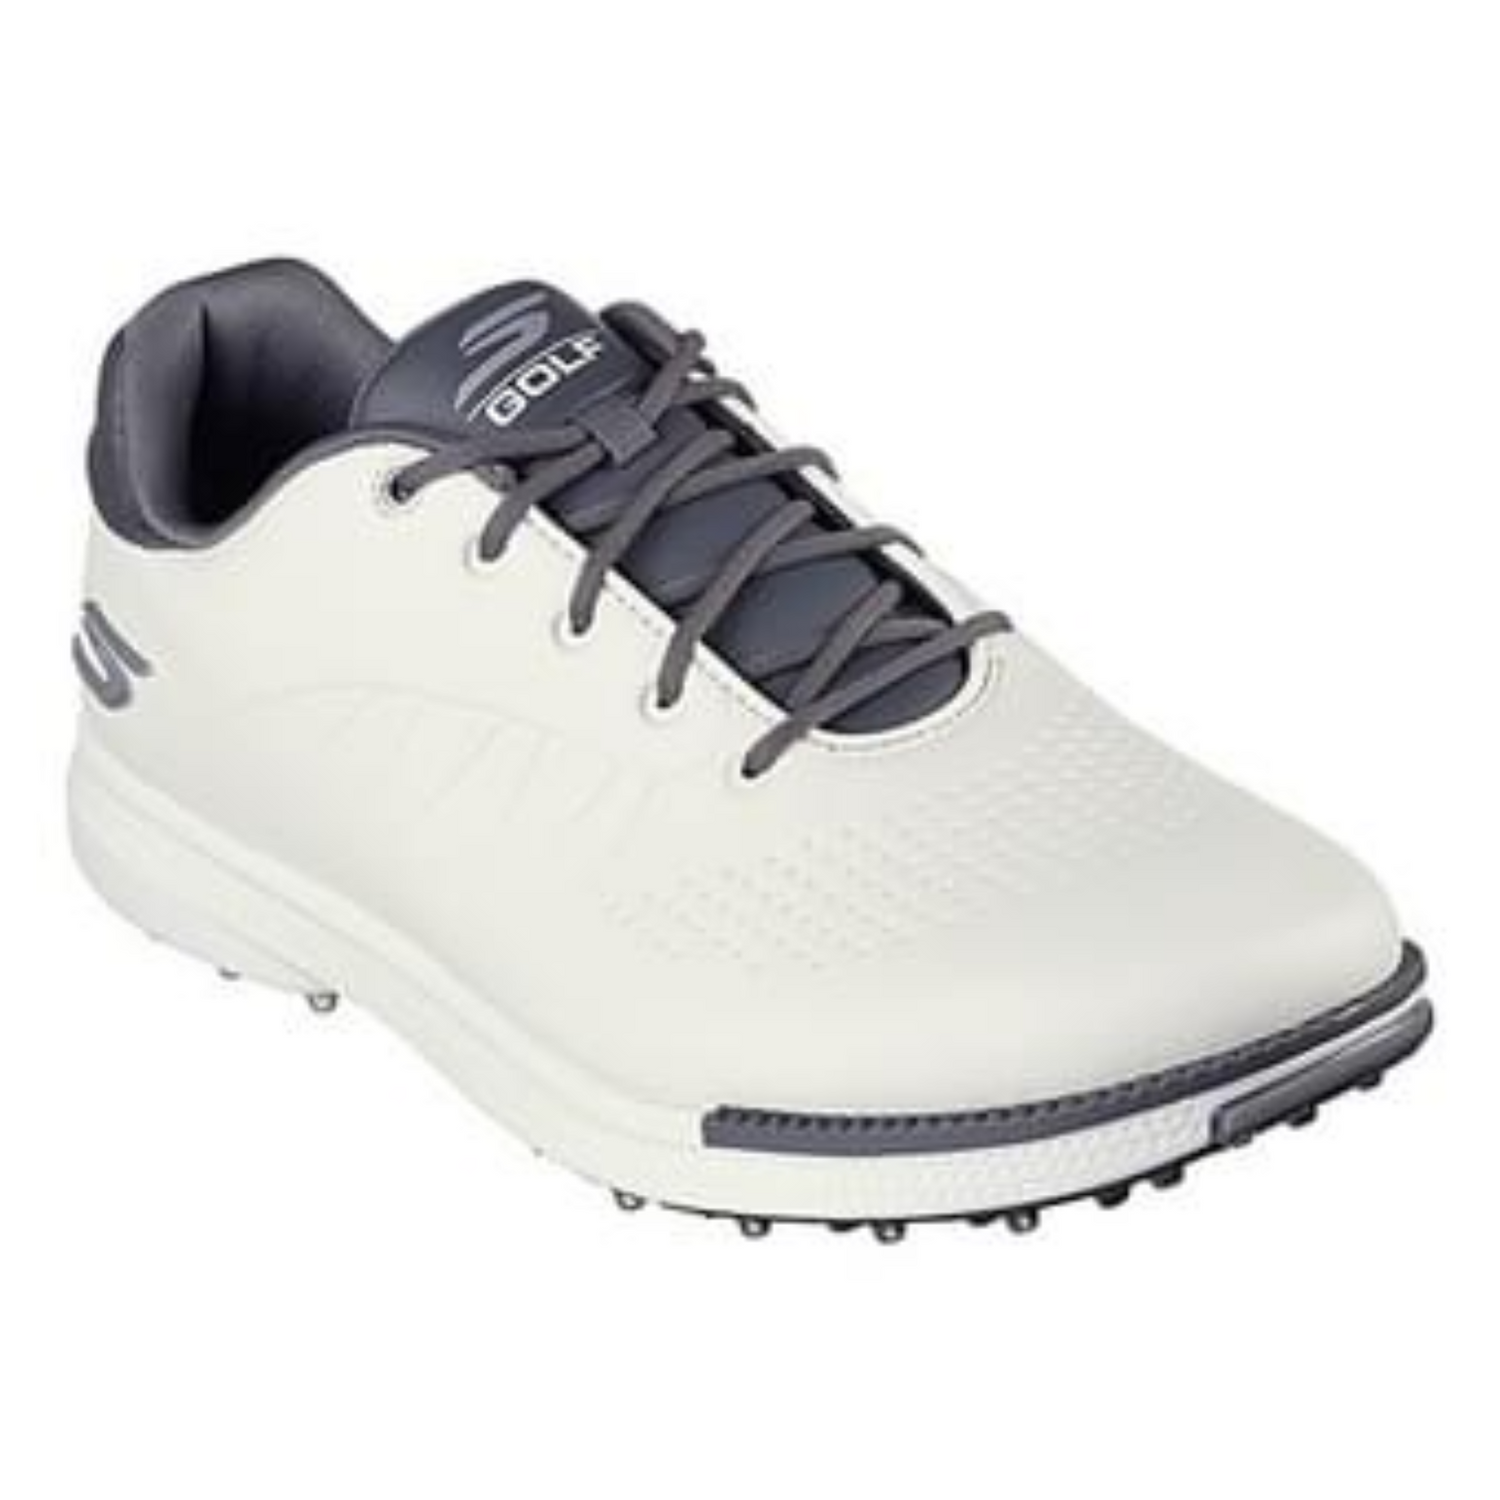 Skechers Go Golf Tempo GF Spikeless Golf Shoes 214099 - White Grey   